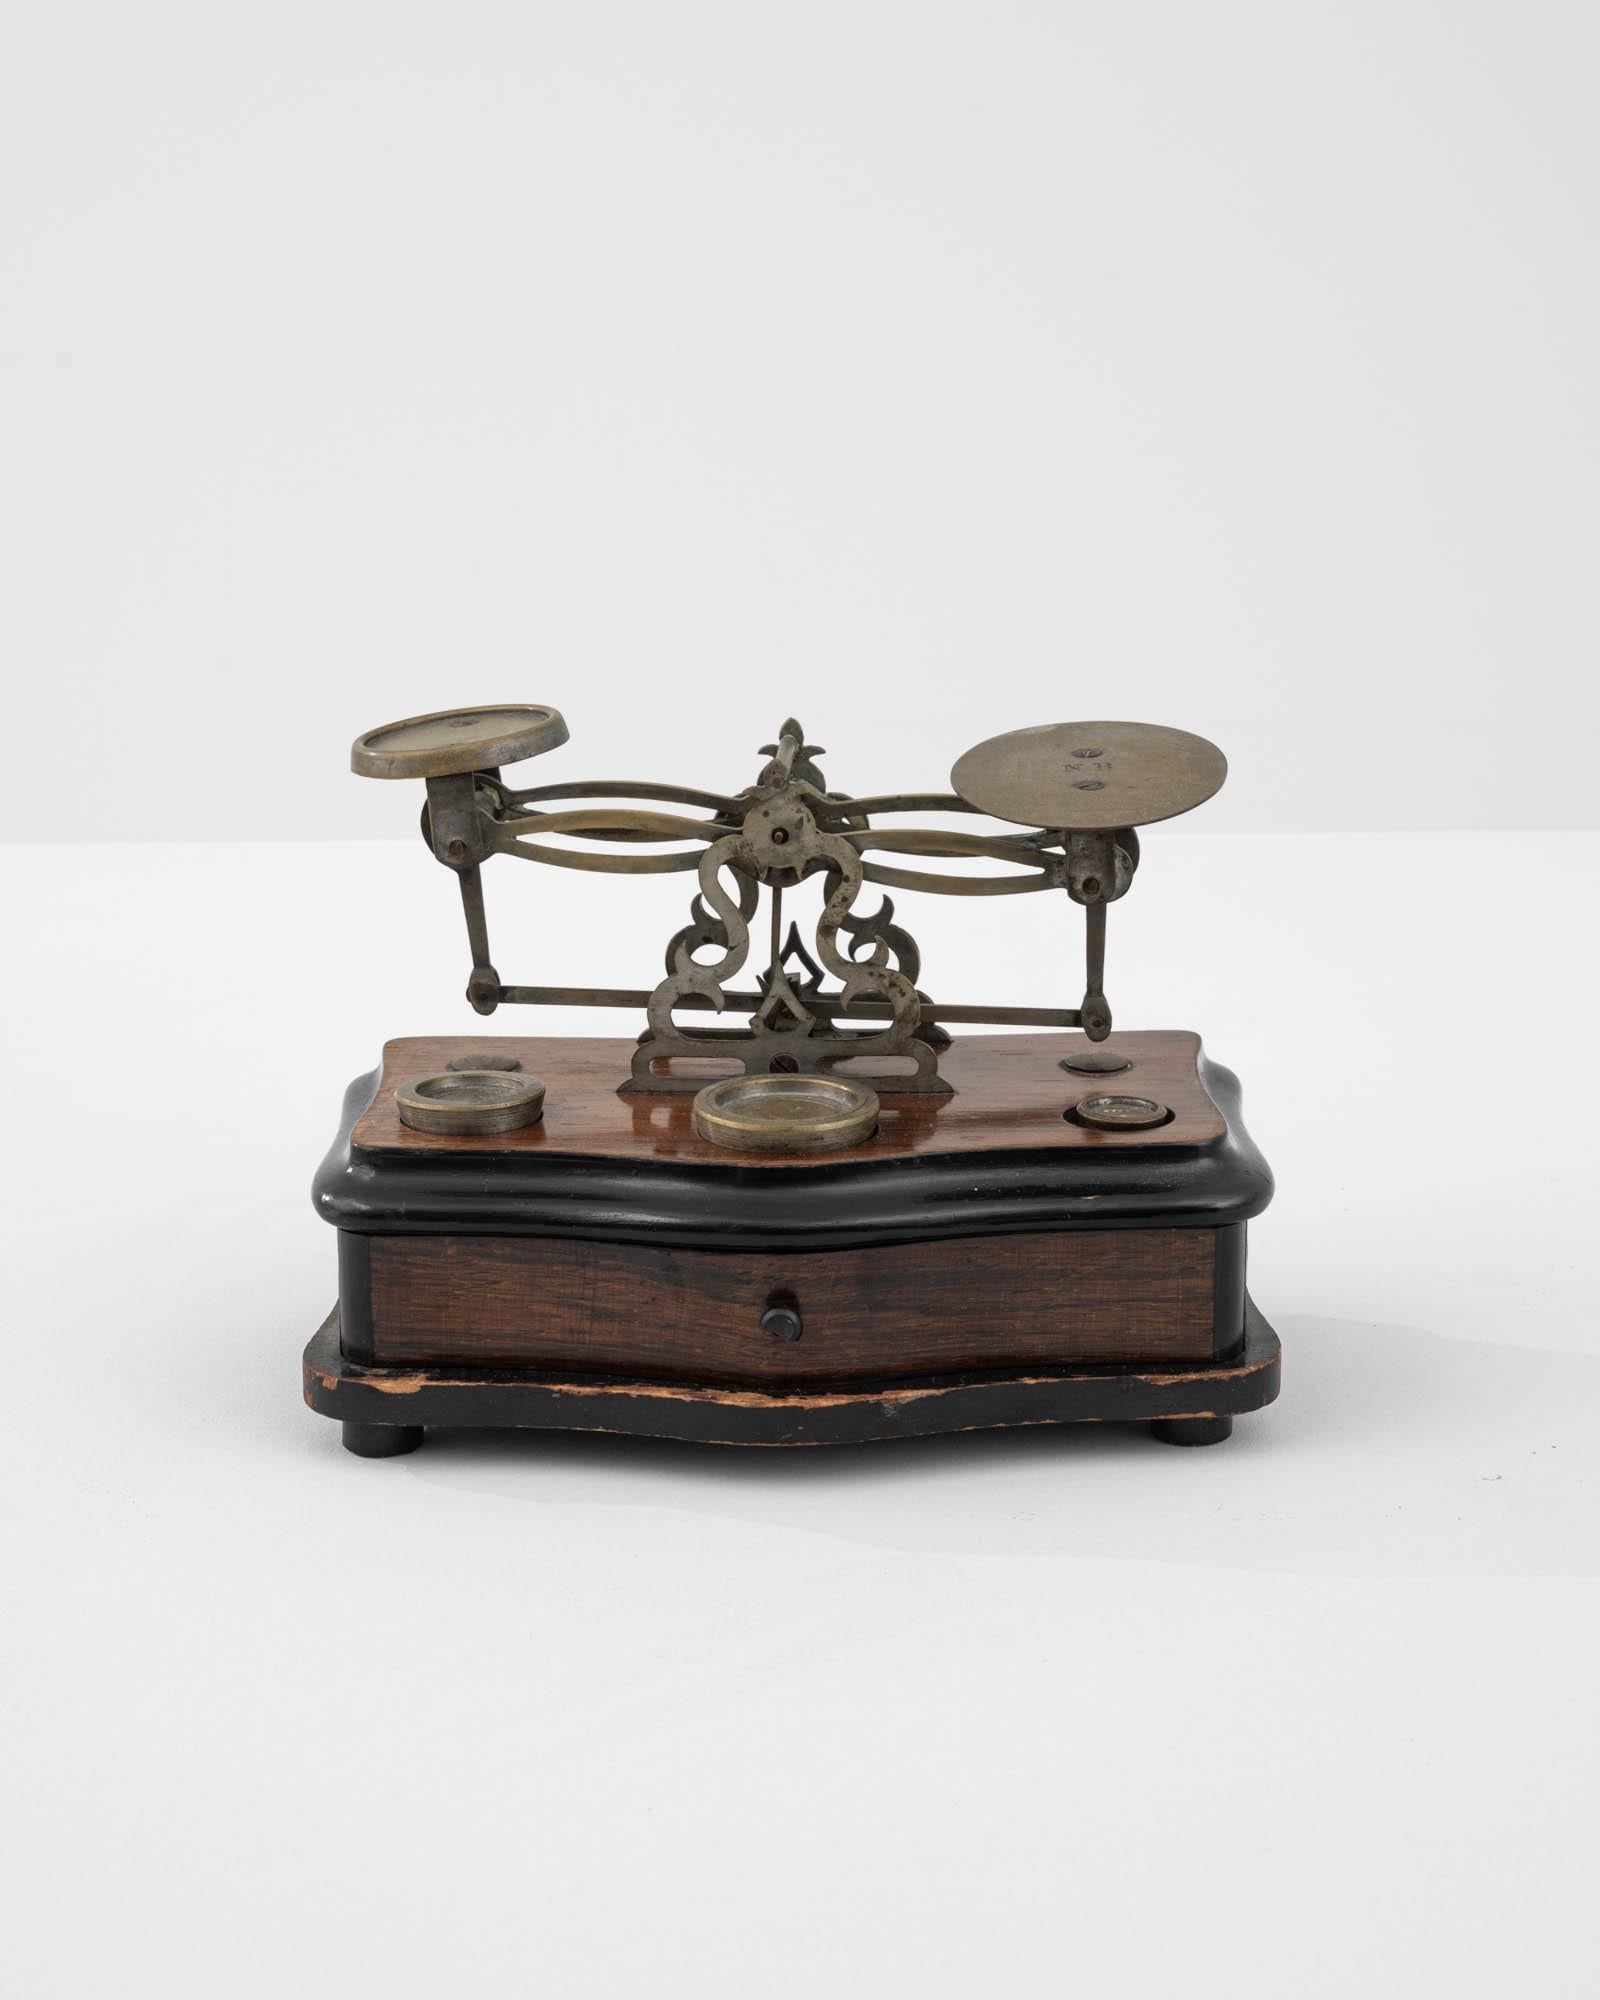 Loyally underhand for quickly weighing out gemstones and precious medals, this trustworthy sidekick was once the prized tool for the detailed work of the jeweler. Made in France in the 19th Century, its careful construction expresses the fascination